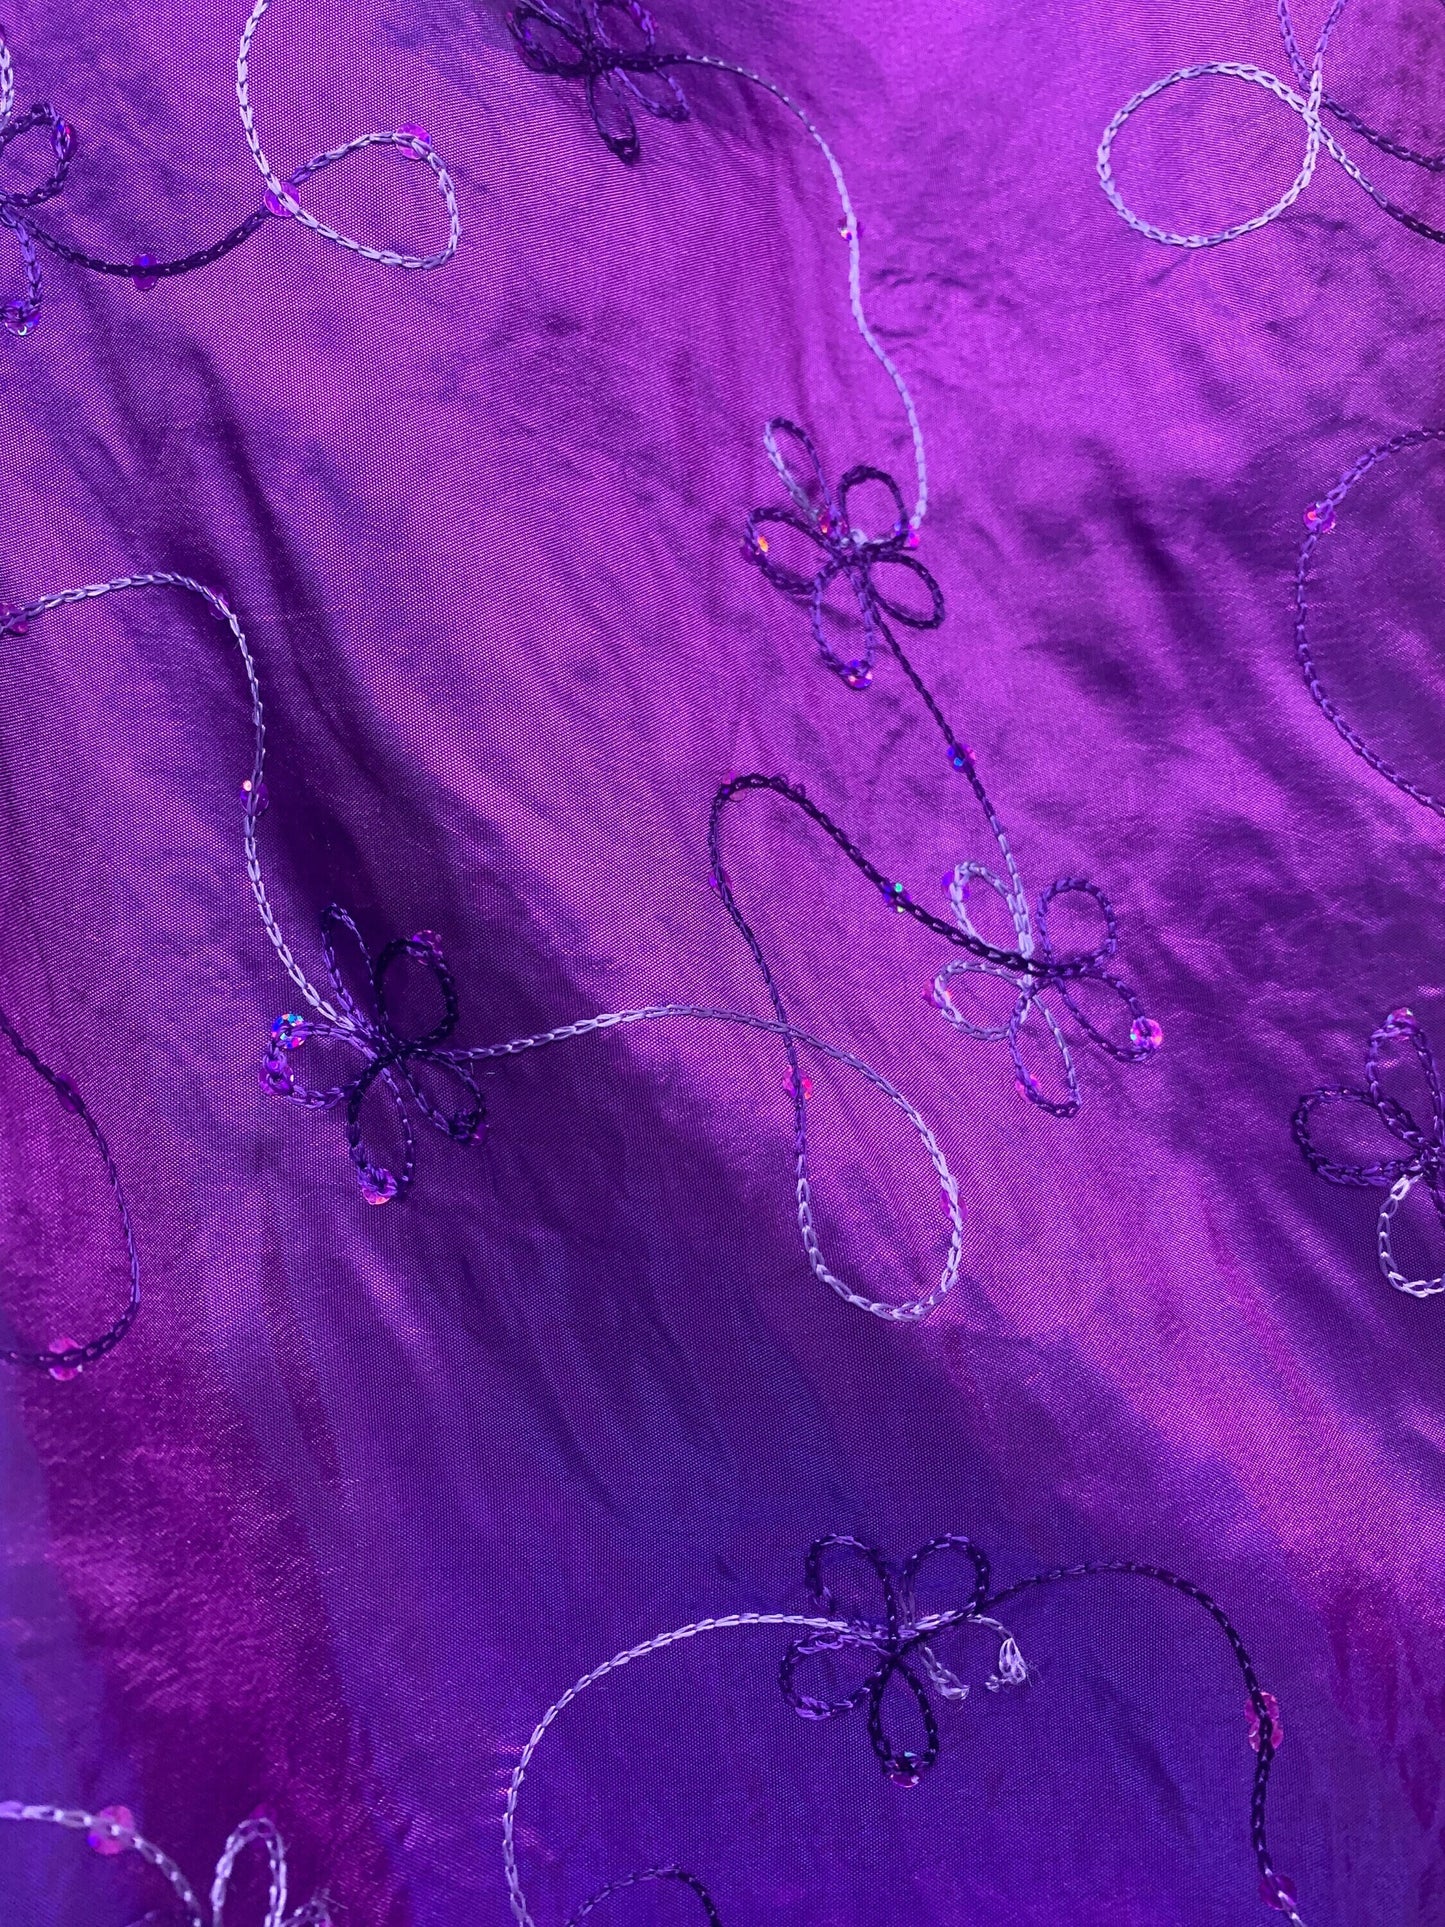 PURPLE Floral Sequins Embroidery Taffeta Fabric (60 in.) Sold By The Yard